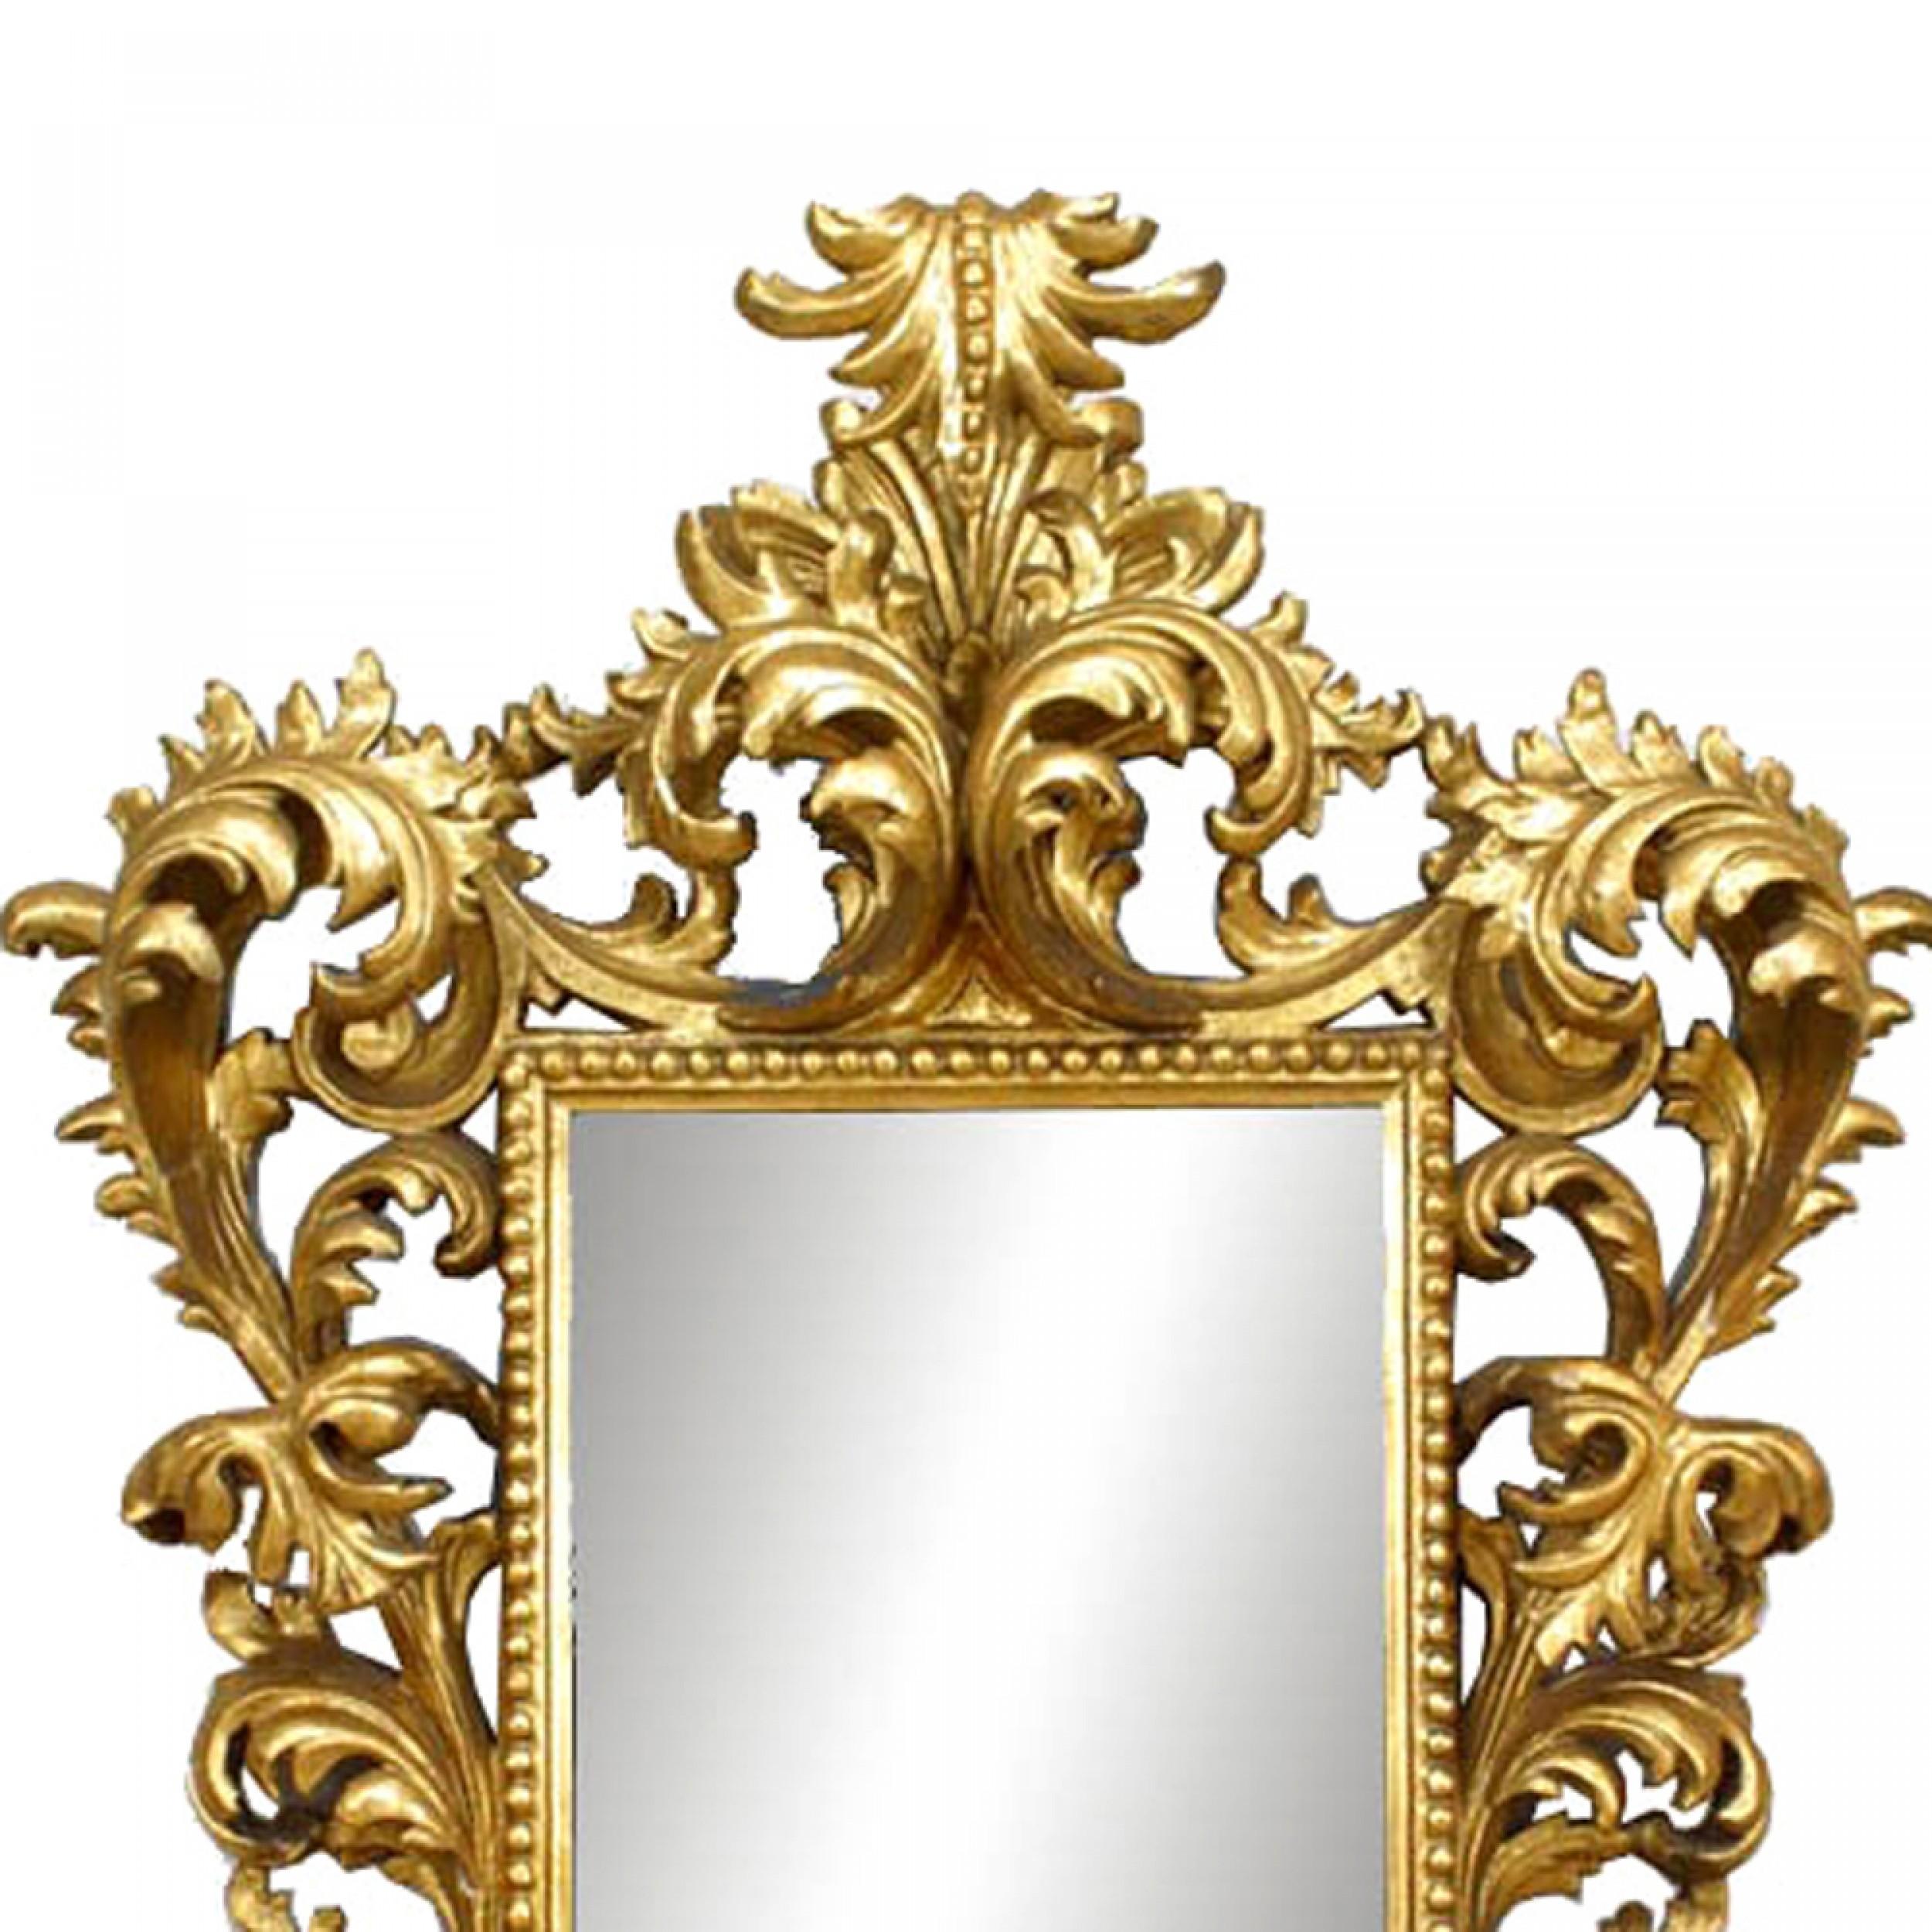 Pair of Italian Rococo Style Giltwood Wall Mirrors For Sale 1